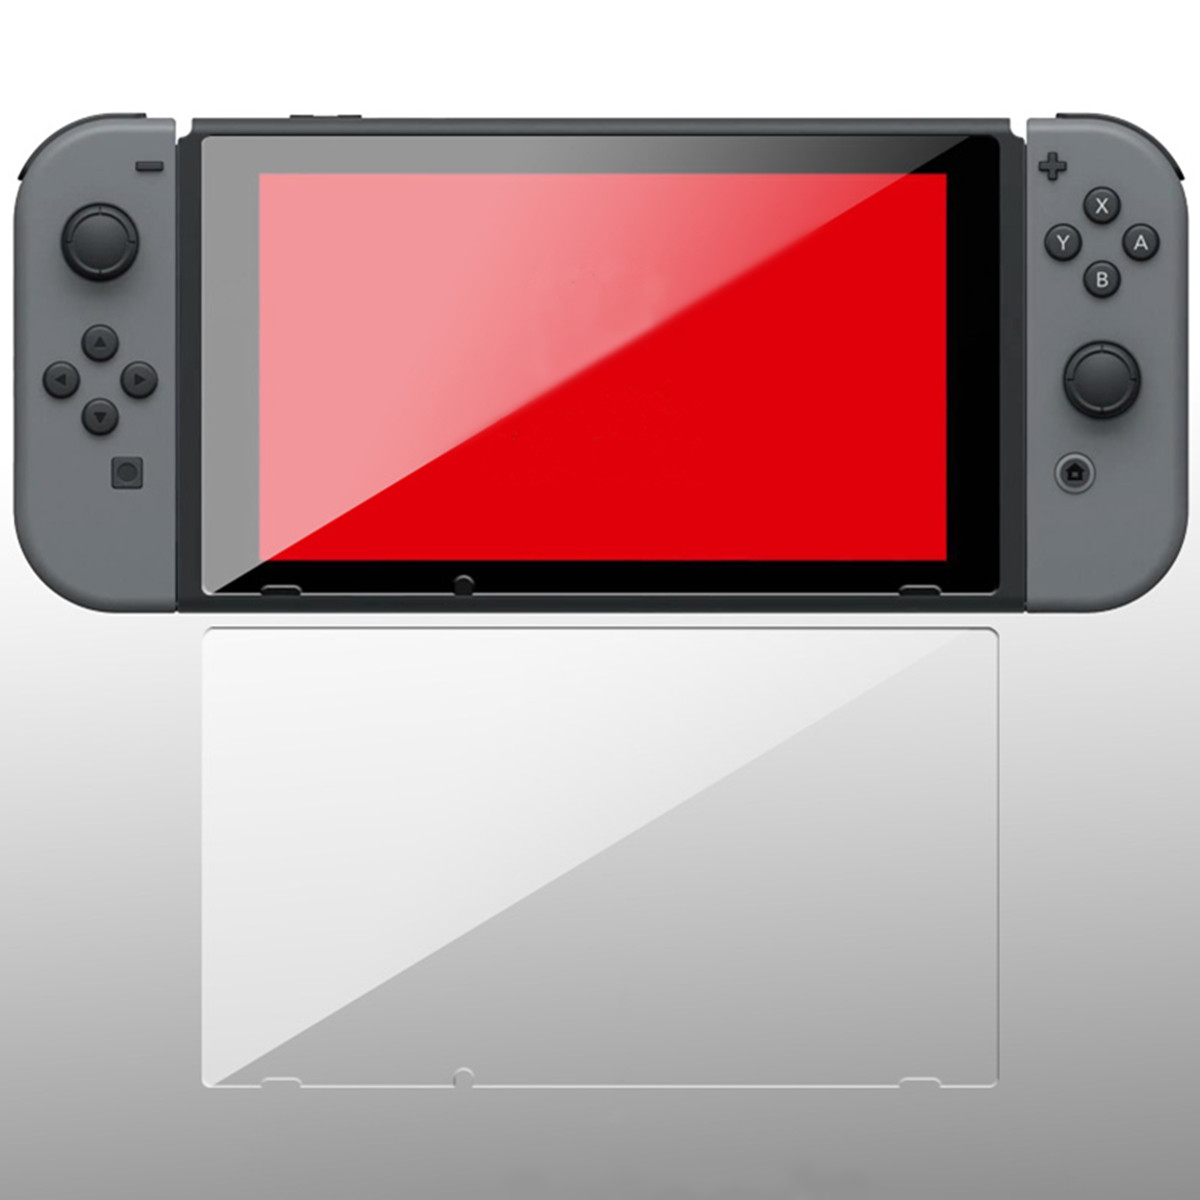 PET-Screen-Protector-Film-Shield-Guard-Transparent-For-Nintendo-Switch-Game-Console-1540489-9